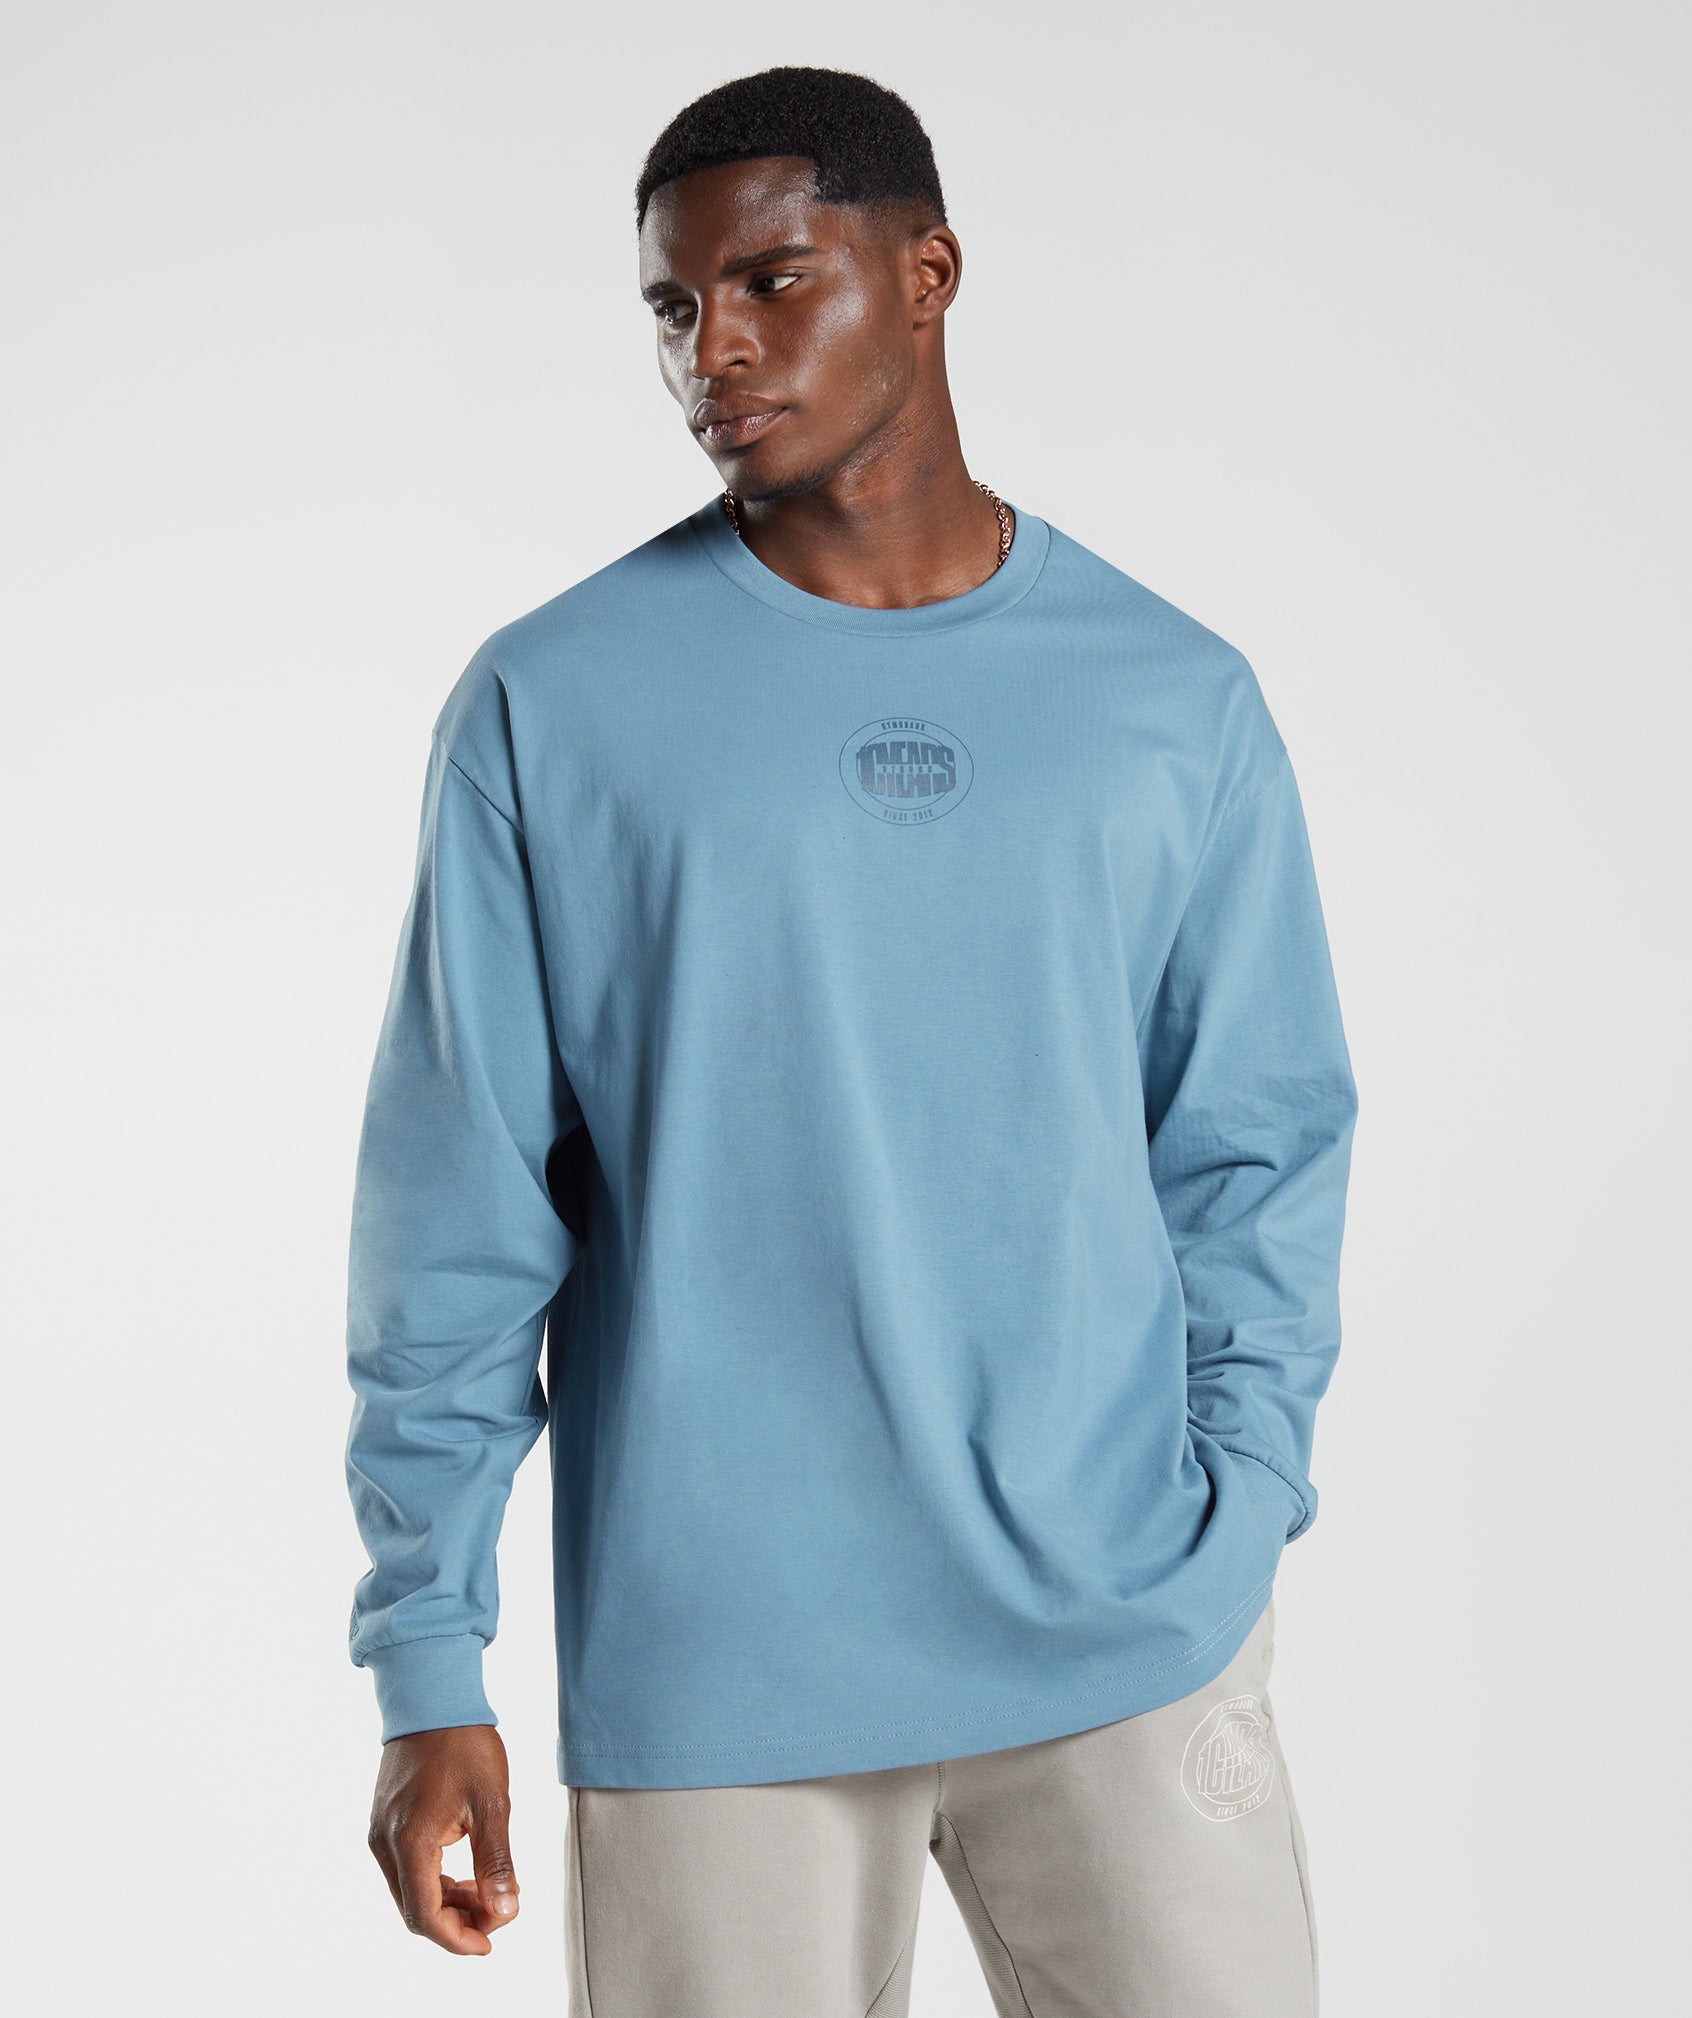 GS10 Year Oversized Long Sleeve T-Shirt in Denim Blue - view 2